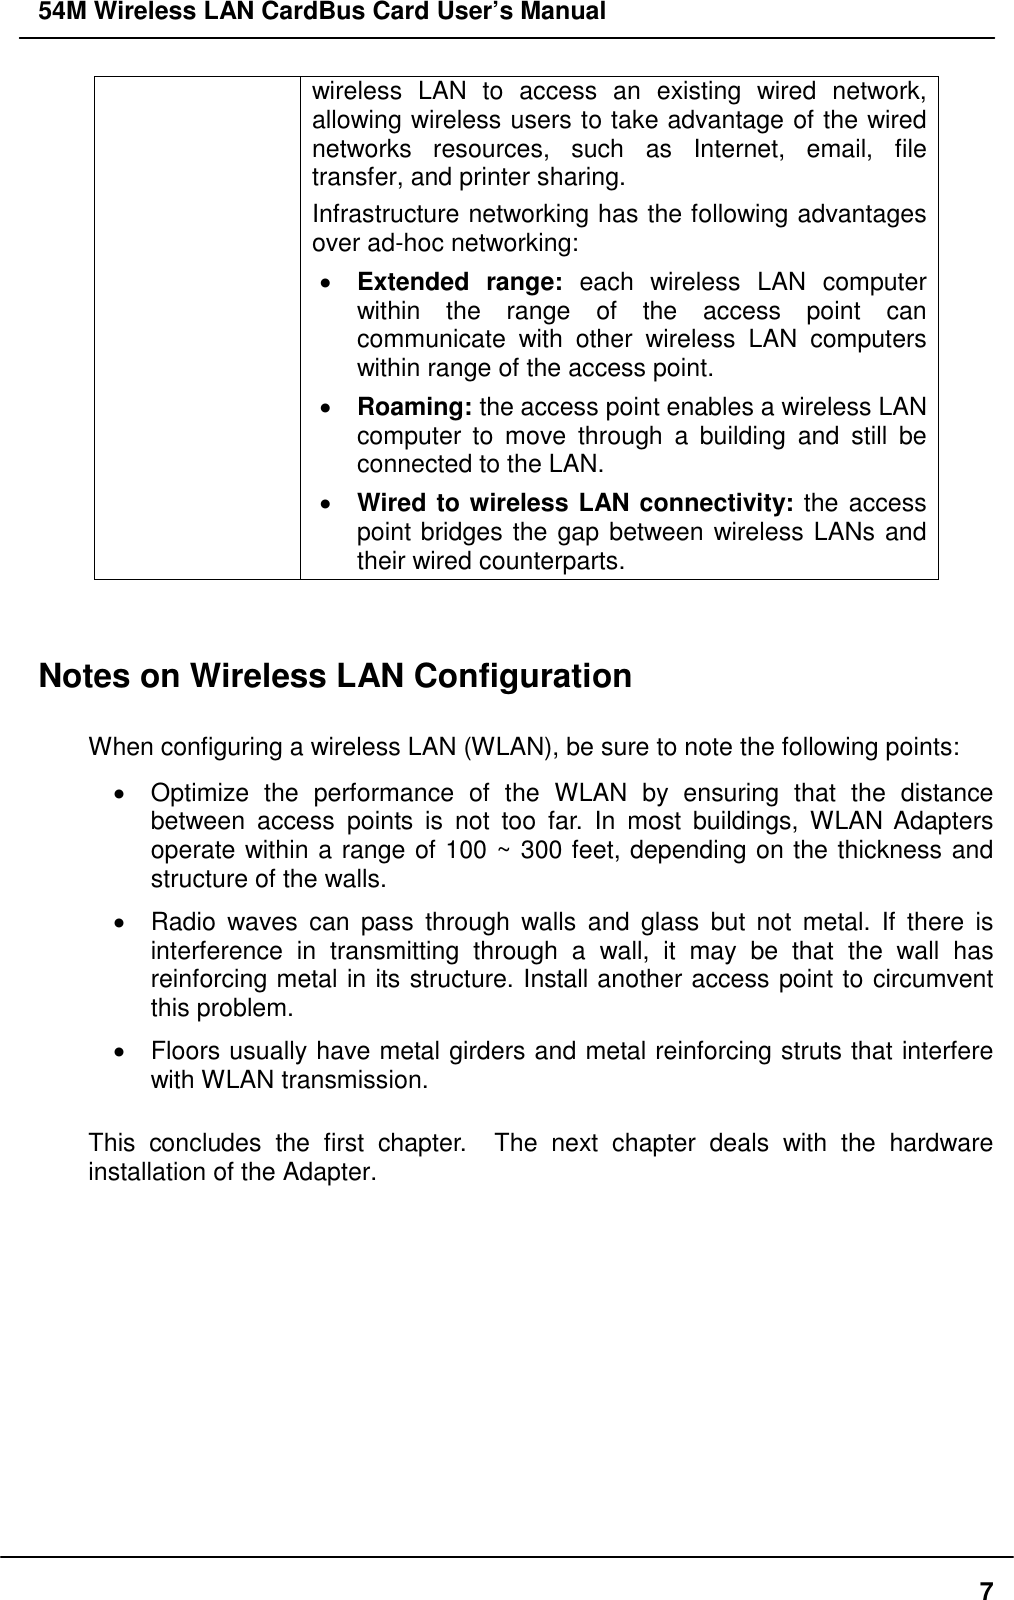 54M Wireless LAN CardBus Card User’s Manual7wireless LAN to access an existing wired network,allowing wireless users to take advantage of the wirednetworks resources, such as Internet, email, filetransfer, and printer sharing.Infrastructure networking has the following advantagesover ad-hoc networking:• Extended range: each wireless LAN computerwithin the range of the access point cancommunicate with other wireless LAN computerswithin range of the access point.• Roaming: the access point enables a wireless LANcomputer to move through a building and still beconnected to the LAN.• Wired to wireless LAN connectivity: the accesspoint bridges the gap between wireless LANs andtheir wired counterparts.Notes on Wireless LAN ConfigurationWhen configuring a wireless LAN (WLAN), be sure to note the following points:•  Optimize the performance of the WLAN by ensuring that the distancebetween access points is not too far. In most buildings, WLAN Adaptersoperate within a range of 100 ~ 300 feet, depending on the thickness andstructure of the walls.•  Radio waves can pass through walls and glass but not metal. If there isinterference in transmitting through a wall, it may be that the wall hasreinforcing metal in its structure. Install another access point to circumventthis problem.•  Floors usually have metal girders and metal reinforcing struts that interferewith WLAN transmission.This concludes the first chapter.  The next chapter deals with the hardwareinstallation of the Adapter.